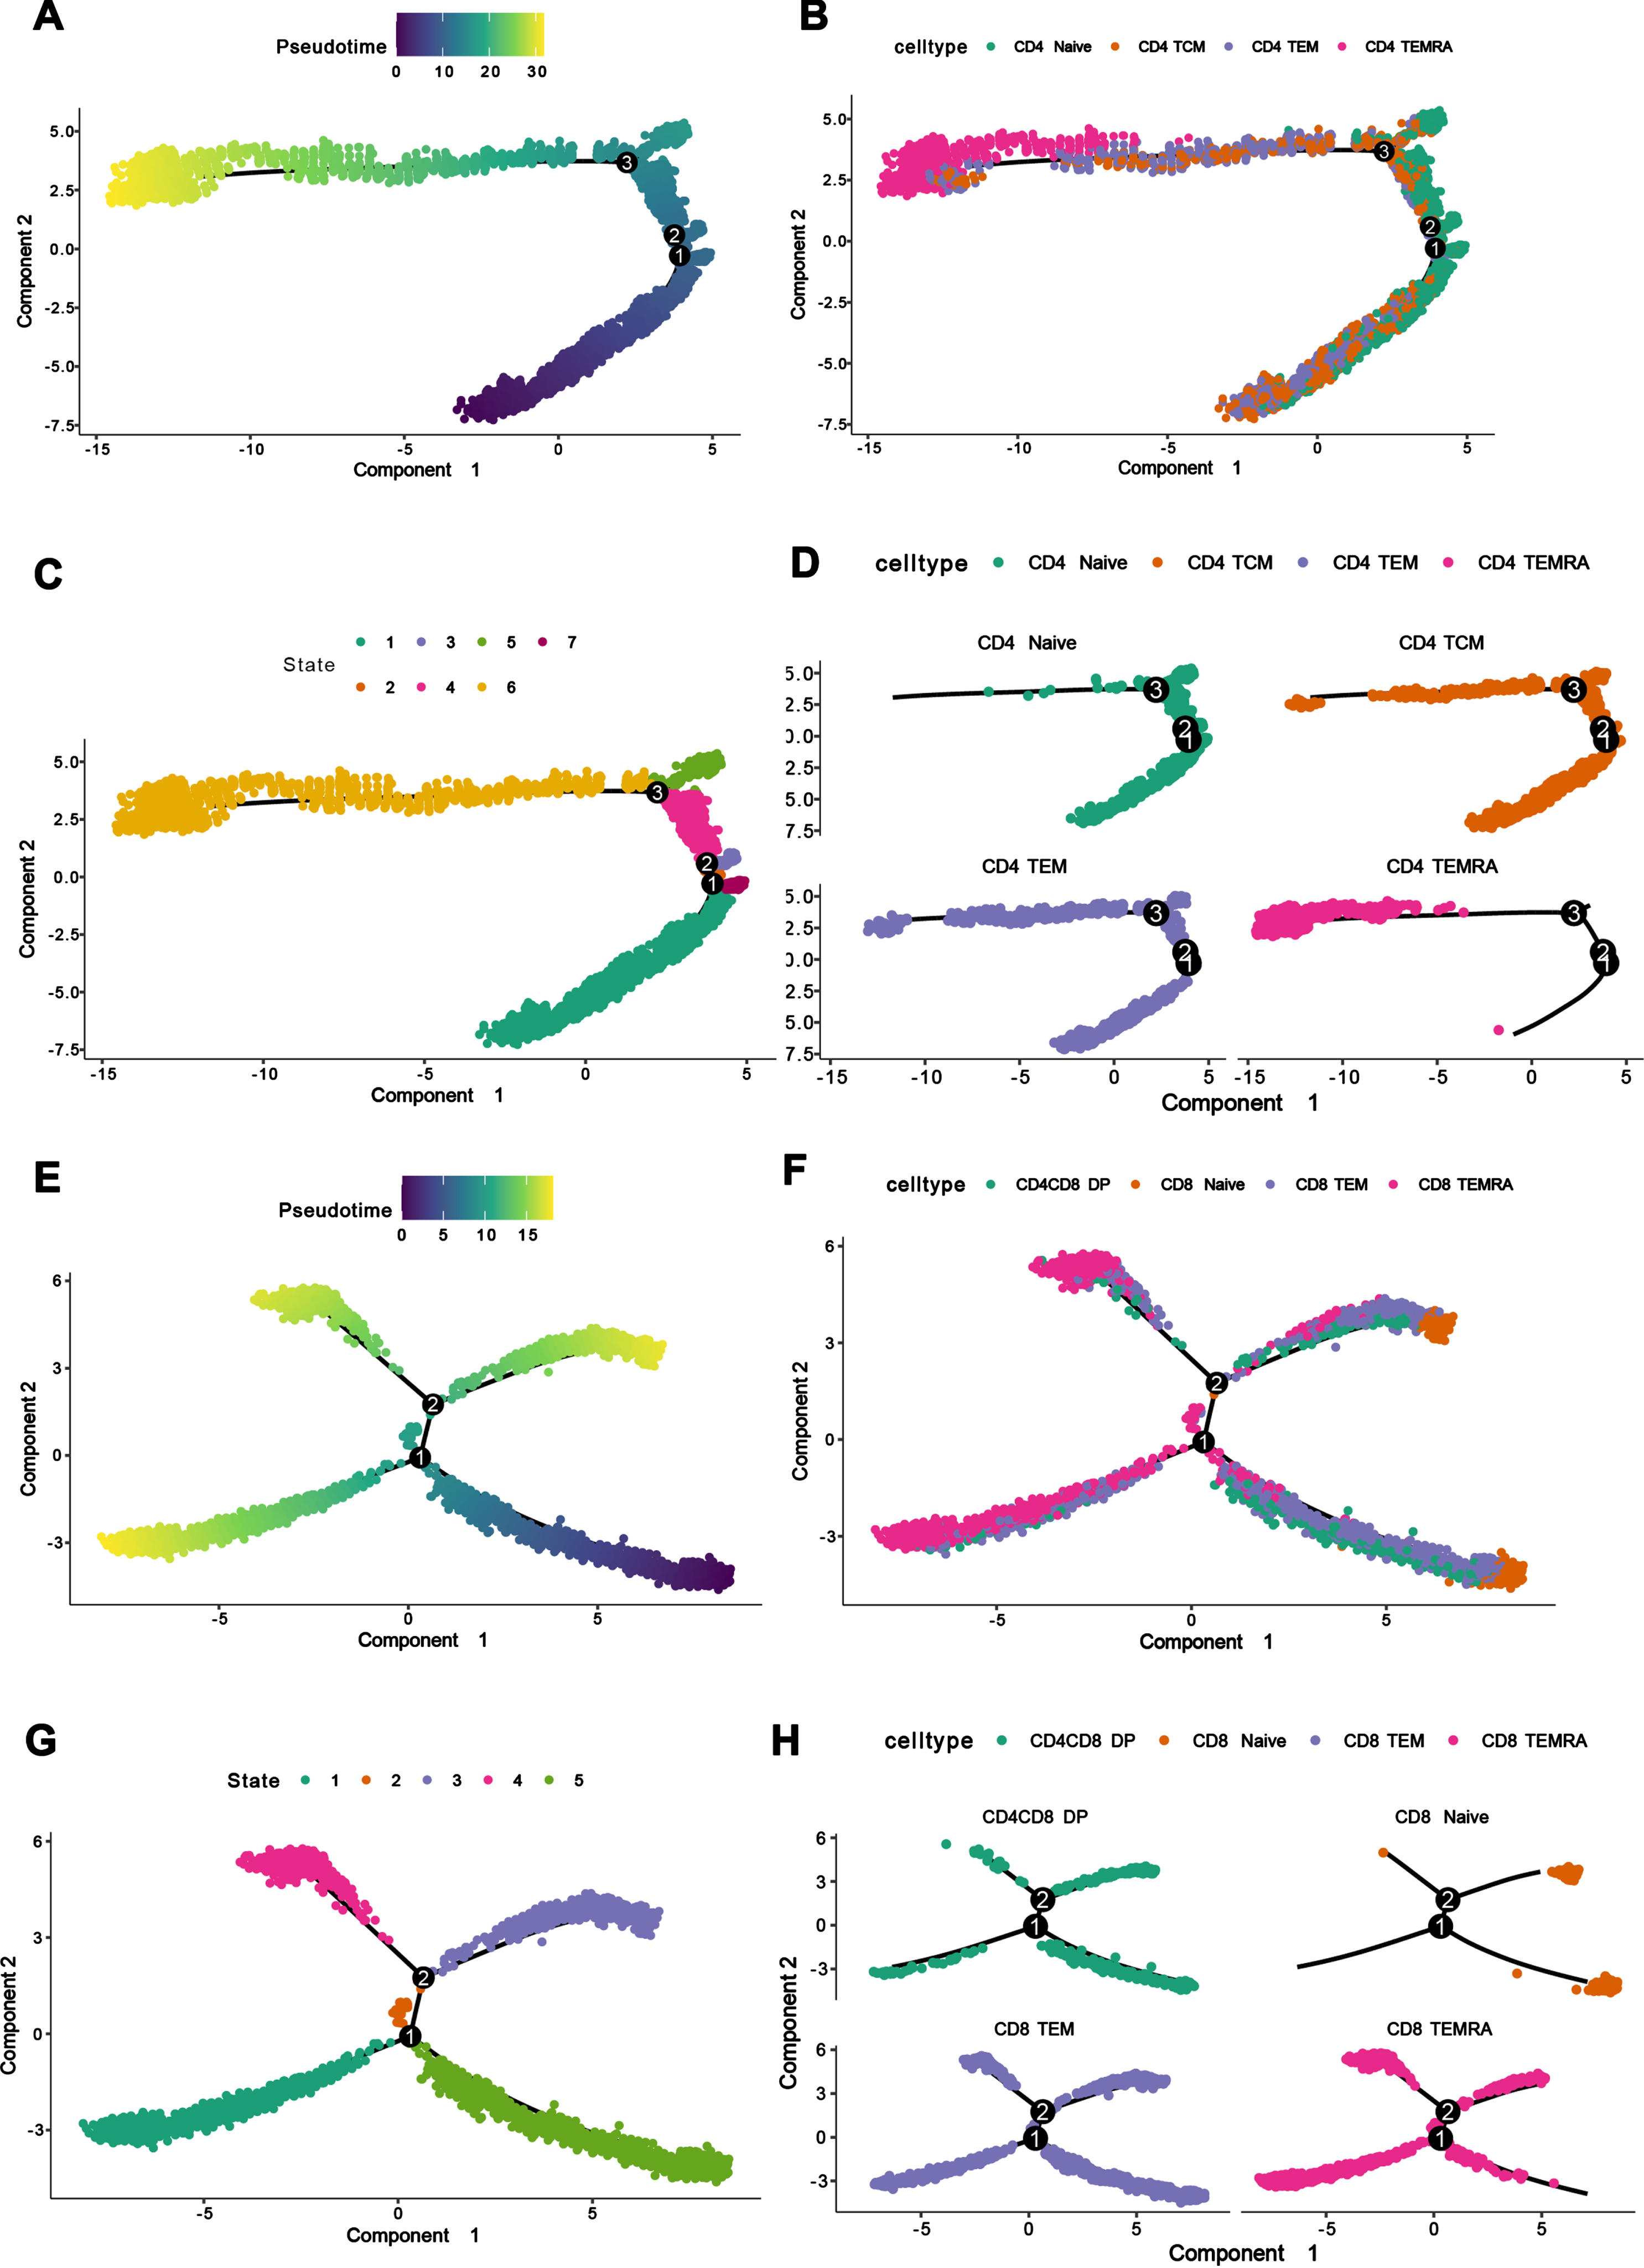 Pseudo-time analysis and single cell tractor analysis of the subpopulations of CD4+ T cells and CD8+ T cell. A) Pseudo-time and single cell trajectory analysis by Monocle. CD4+ Naïve T cells were defined as the initial state of T cells, so the pseudo-time sequence here represented the developmental sequence of cells, and the more yellow colored area represented the higher degree of differentiation. B) CD4+ T cell differentiation trajectory graph, corresponding to the pseudo-time graph, showing the differentiation trajectories of different CD4+ T cell subpopulations. C) Monocle proposed temporal state diagram, corresponding to the pseudo-time graph, each color represented a different differentiation state. D) CD4+ T cell differentiation trajectory graph, which separated CD4+ T cells by cell subpopulation to show the differentiation trajectories of different cell subpopulations. E) Pseudo-time and single cell trajectory analysis by Monocle. CD8+ Naïve T cells were defined as the initial state of T cells, so the pseudo-time sequence here represented the developmental order of cells, and the more yellow colored area represents the higher differentiation degree. F) CD8+ T cell differentiation trajectory graph, corresponding to the pseudo-time graph, showing the differentiation trajectories of different CD8+ T cell subpopulations. G) Monocle proposed temporal state graph, corresponding to the pseudo-temporal graph, each color represented a different differentiation state. H) CD8+ T cell differentiation trajectory map, which separated CD8+ T cells by cell subpopulation to show the differentiation trajectories of different cell subpopulations.